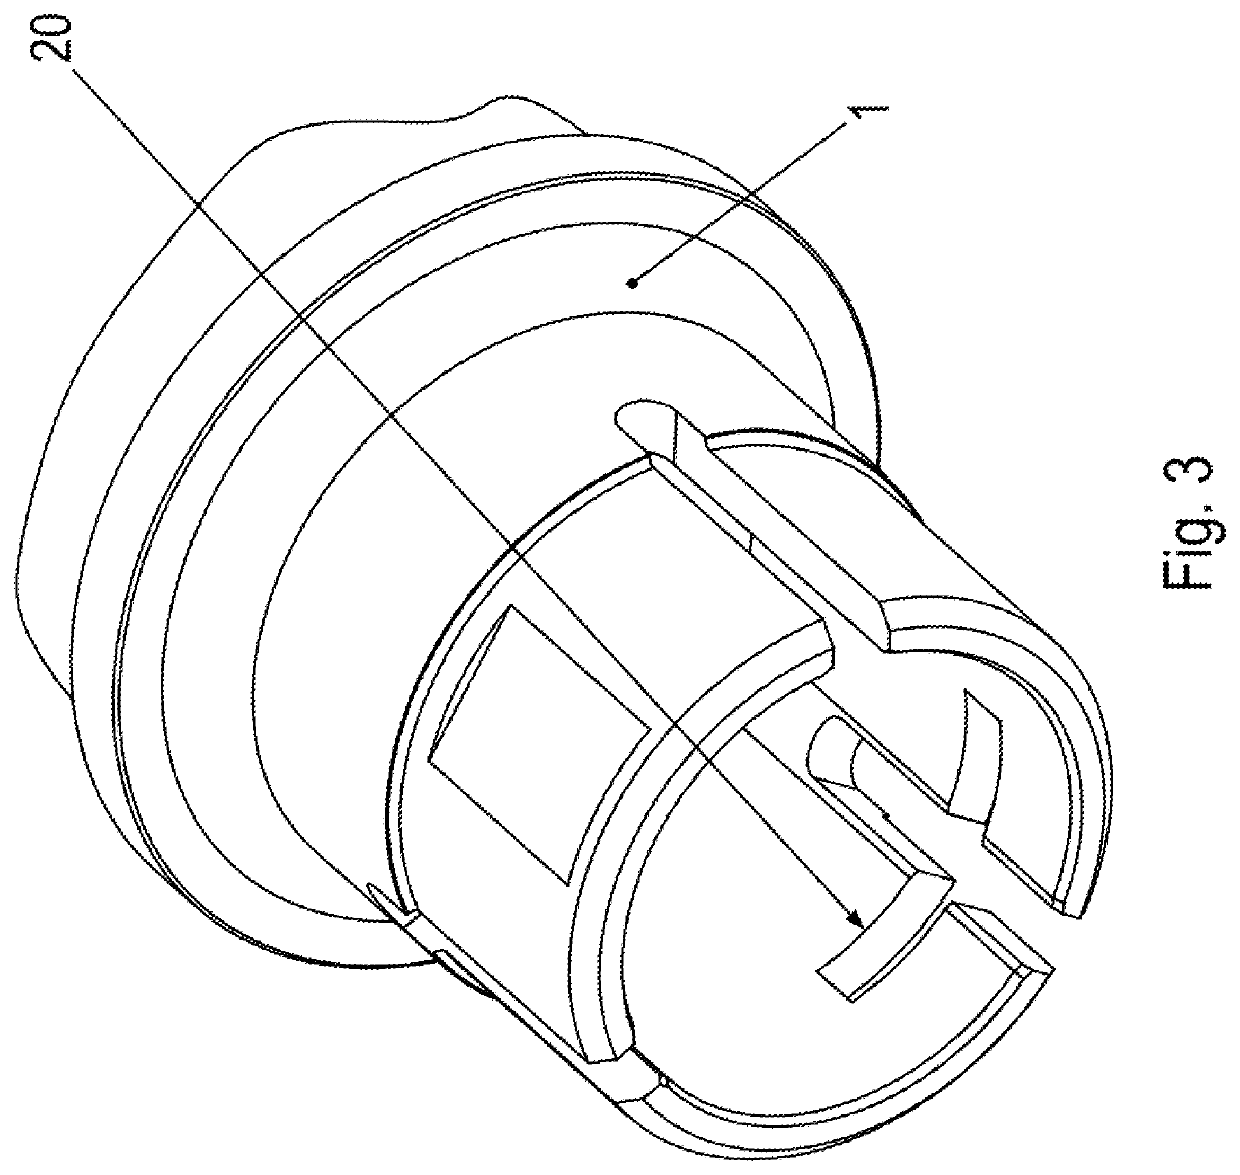 Assembly for connecting an adapter shaft to a shaft in a force-fitting manner using a clamping ring